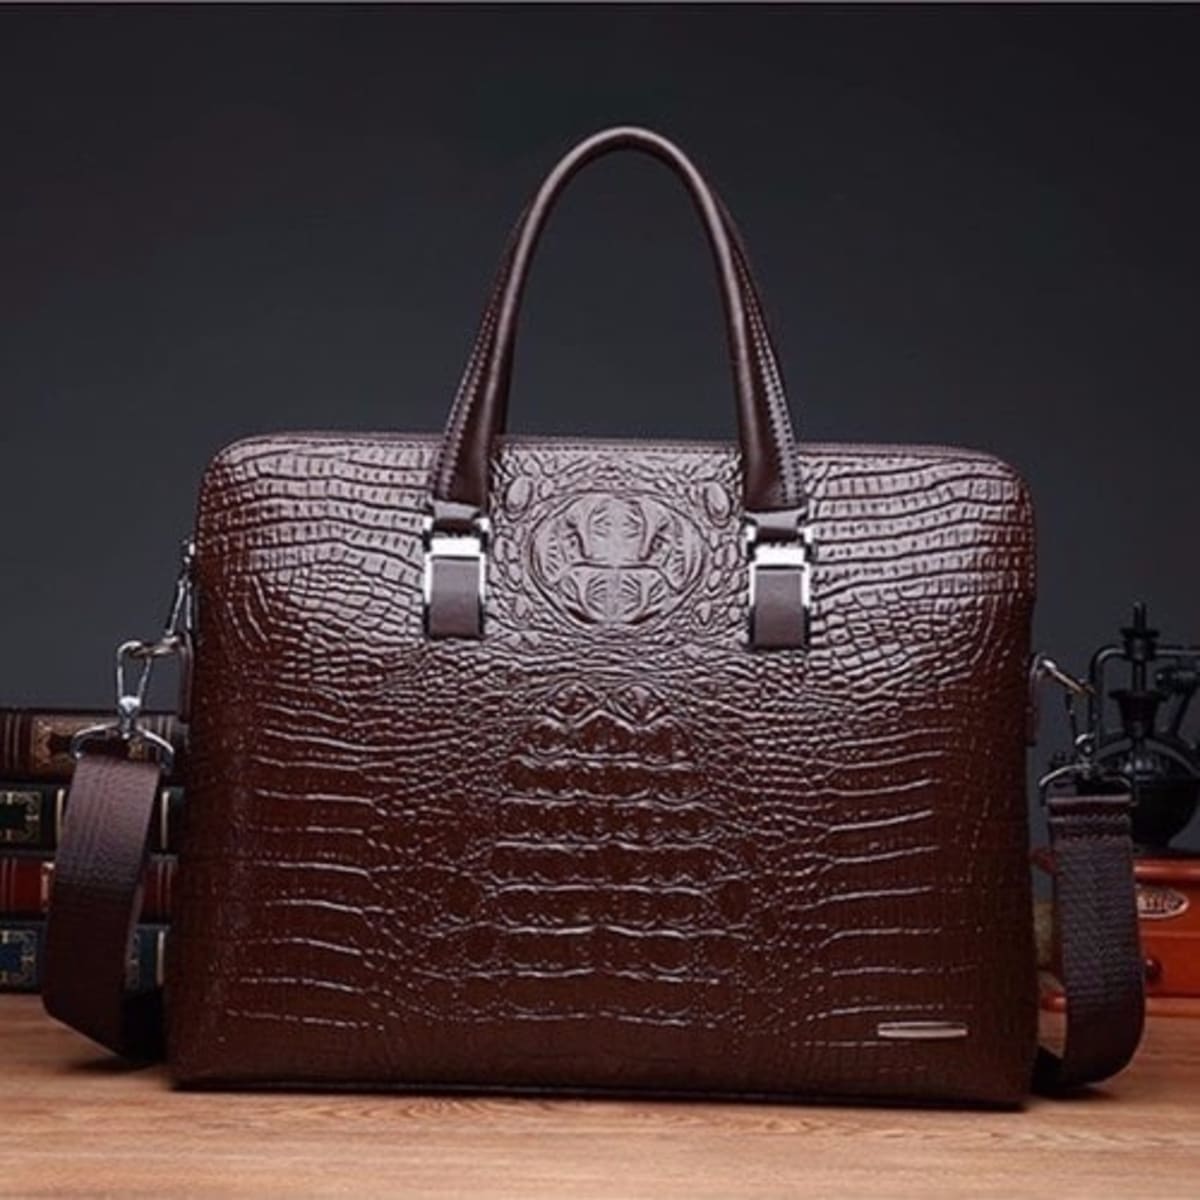 The Queen | Crocodile Leather Handbag Tote | Croco Leather Purse with  Straps - ClutchToteBags.com